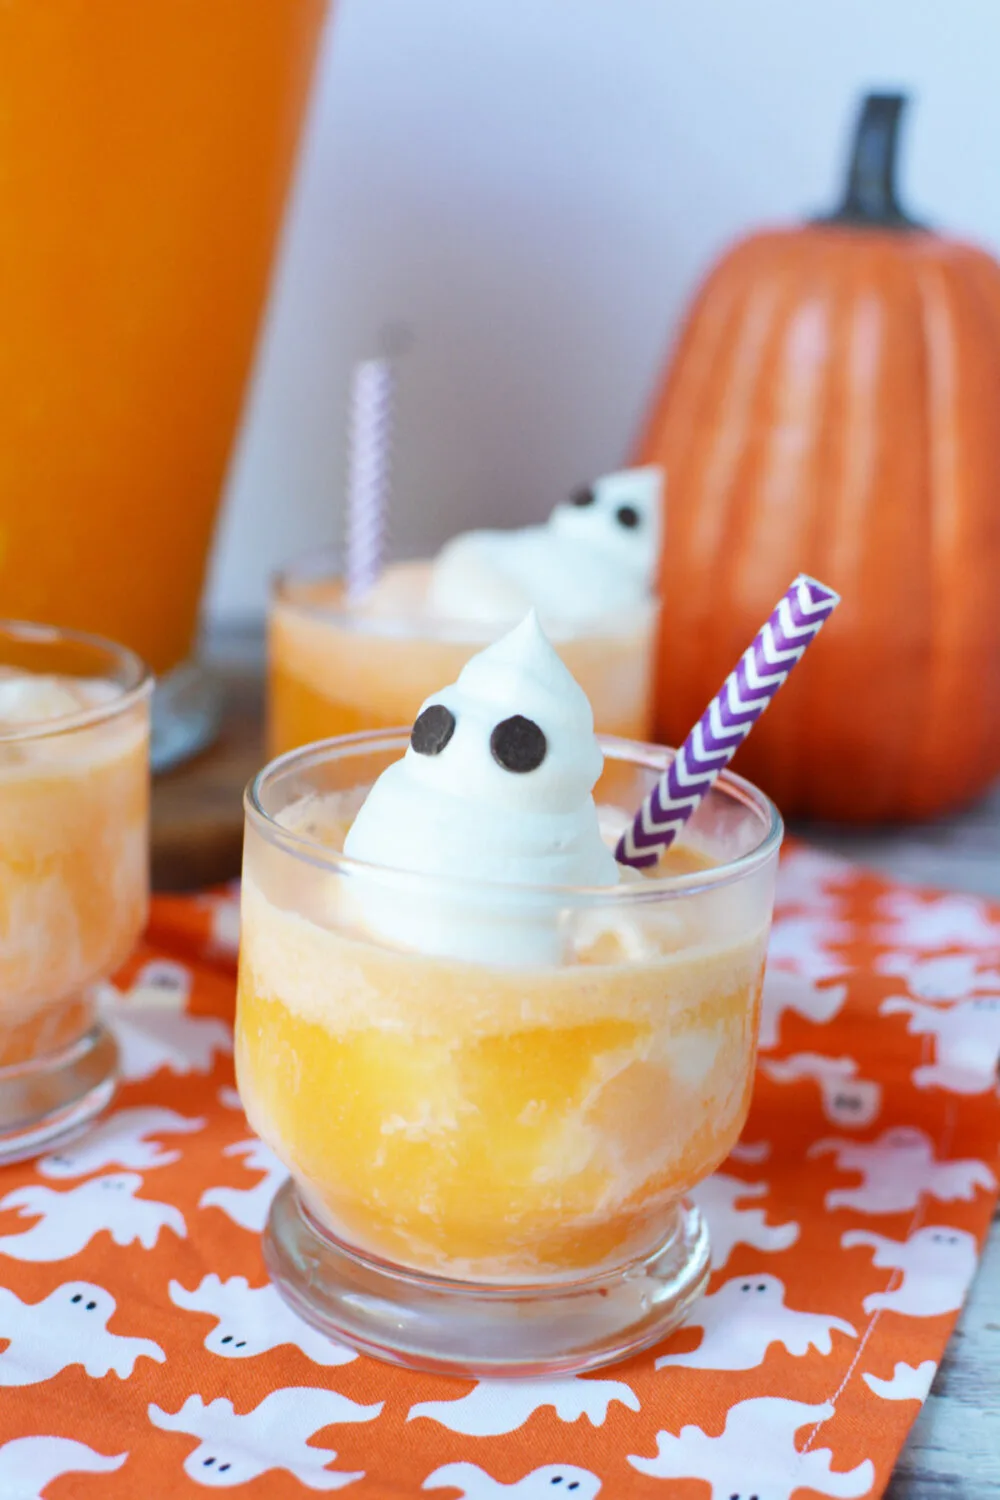 Orange punch with ice cream and whipped cream ghosts with chocolate chip eyes. 